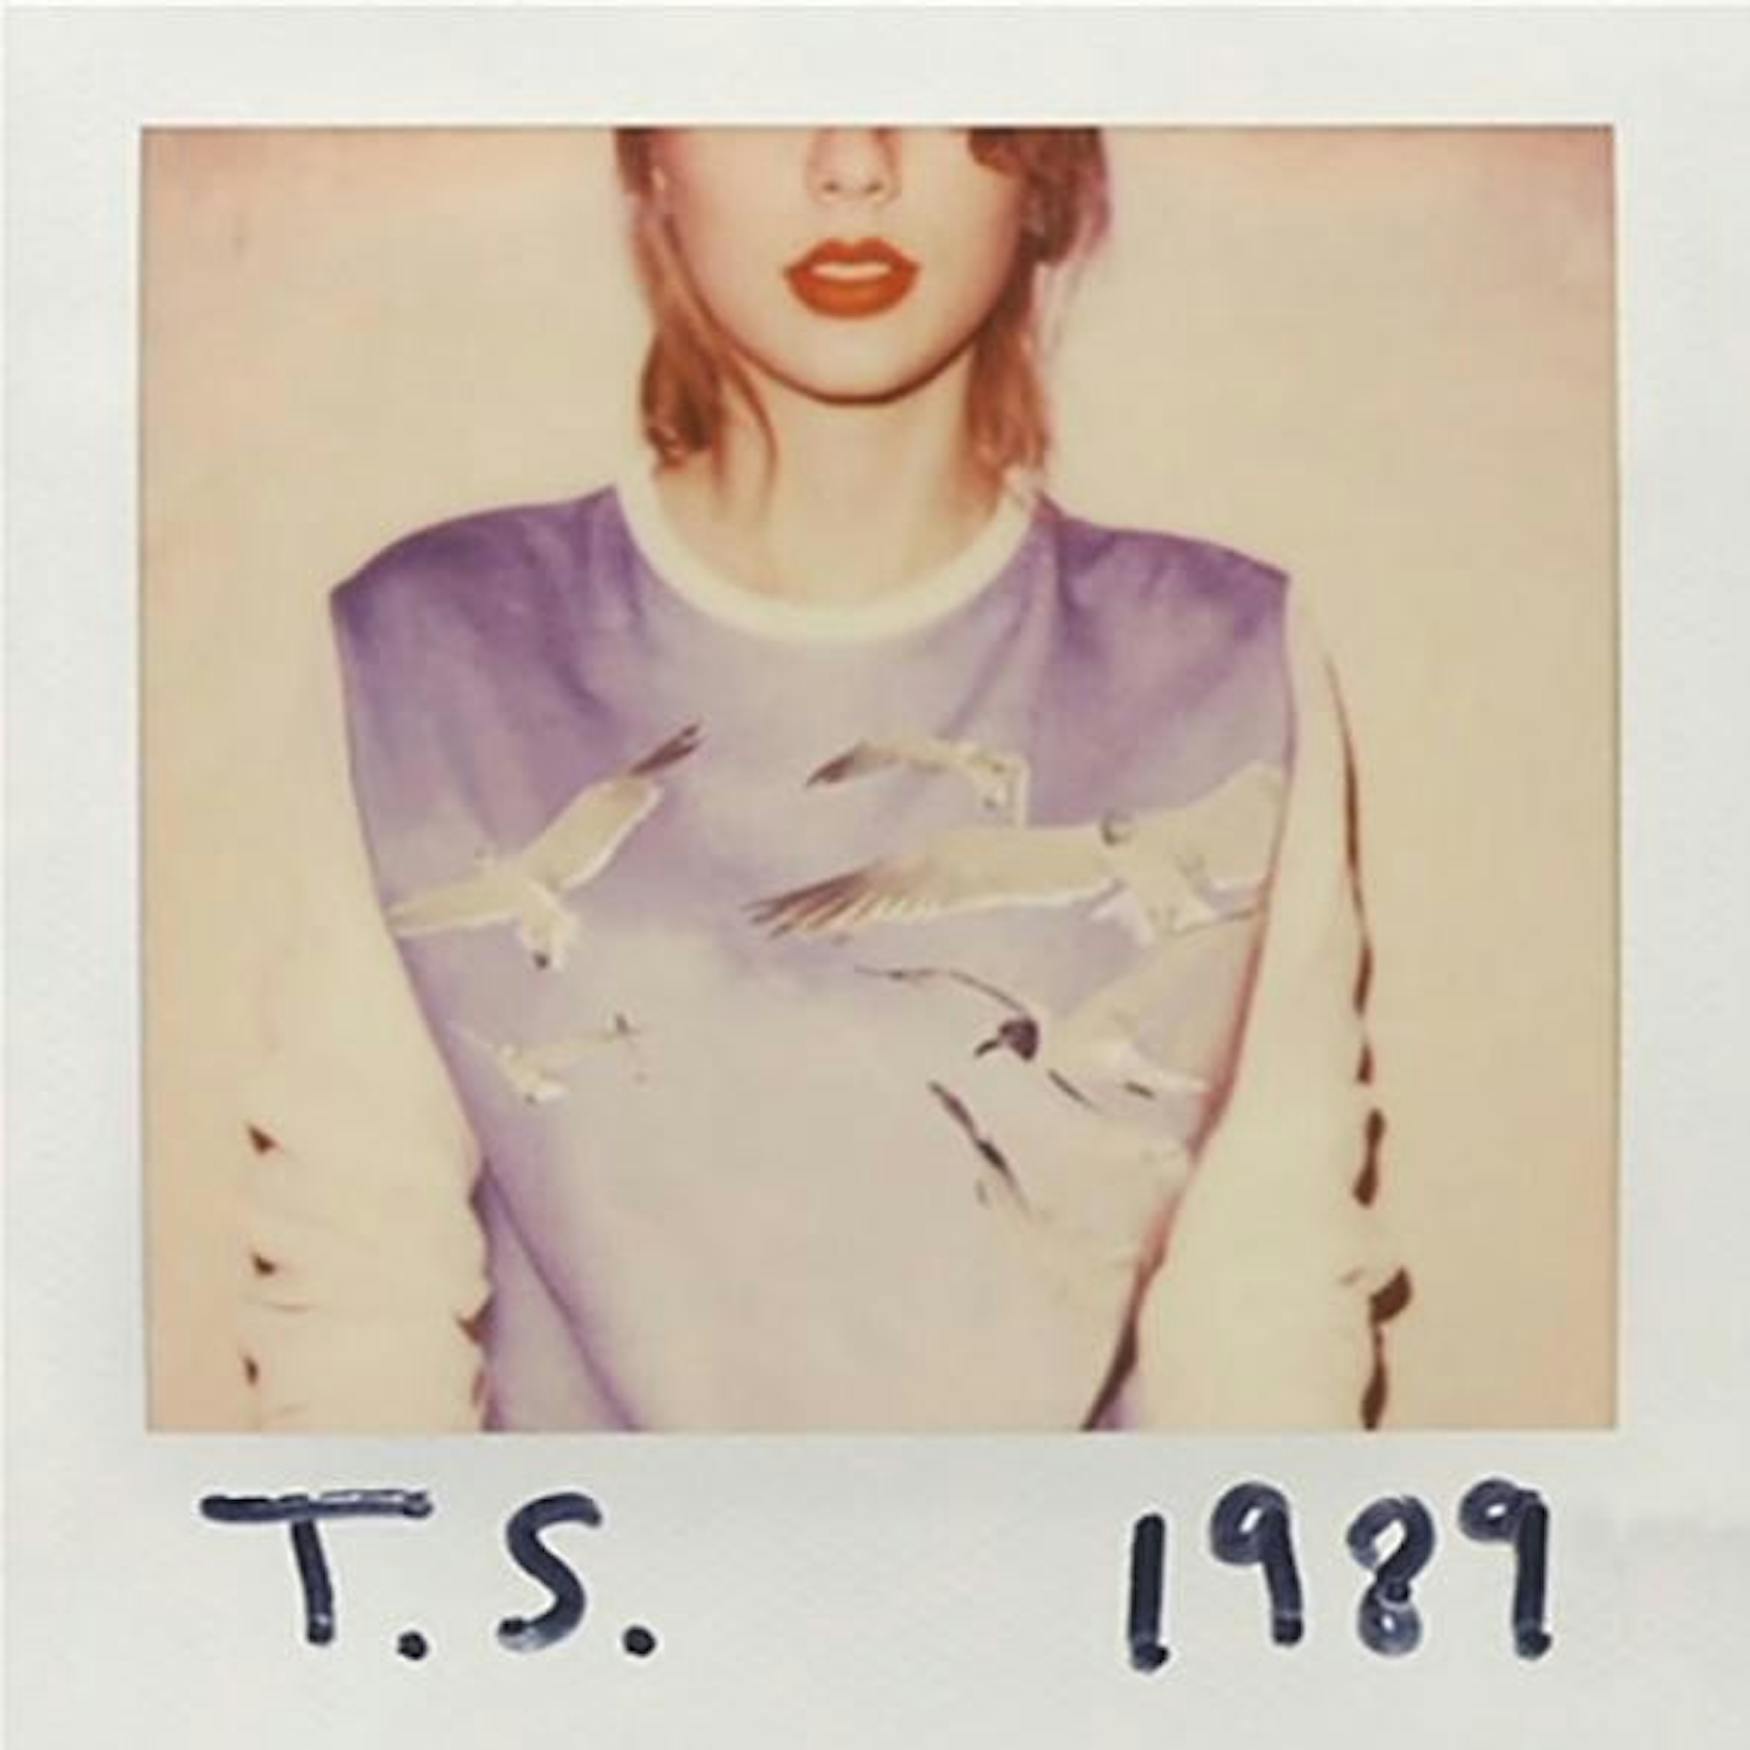 JUST GONNA SHAKE: Taylor Swift’s new album, 1989, in some ways radically deviates from her country style but also adheres to her older persona.